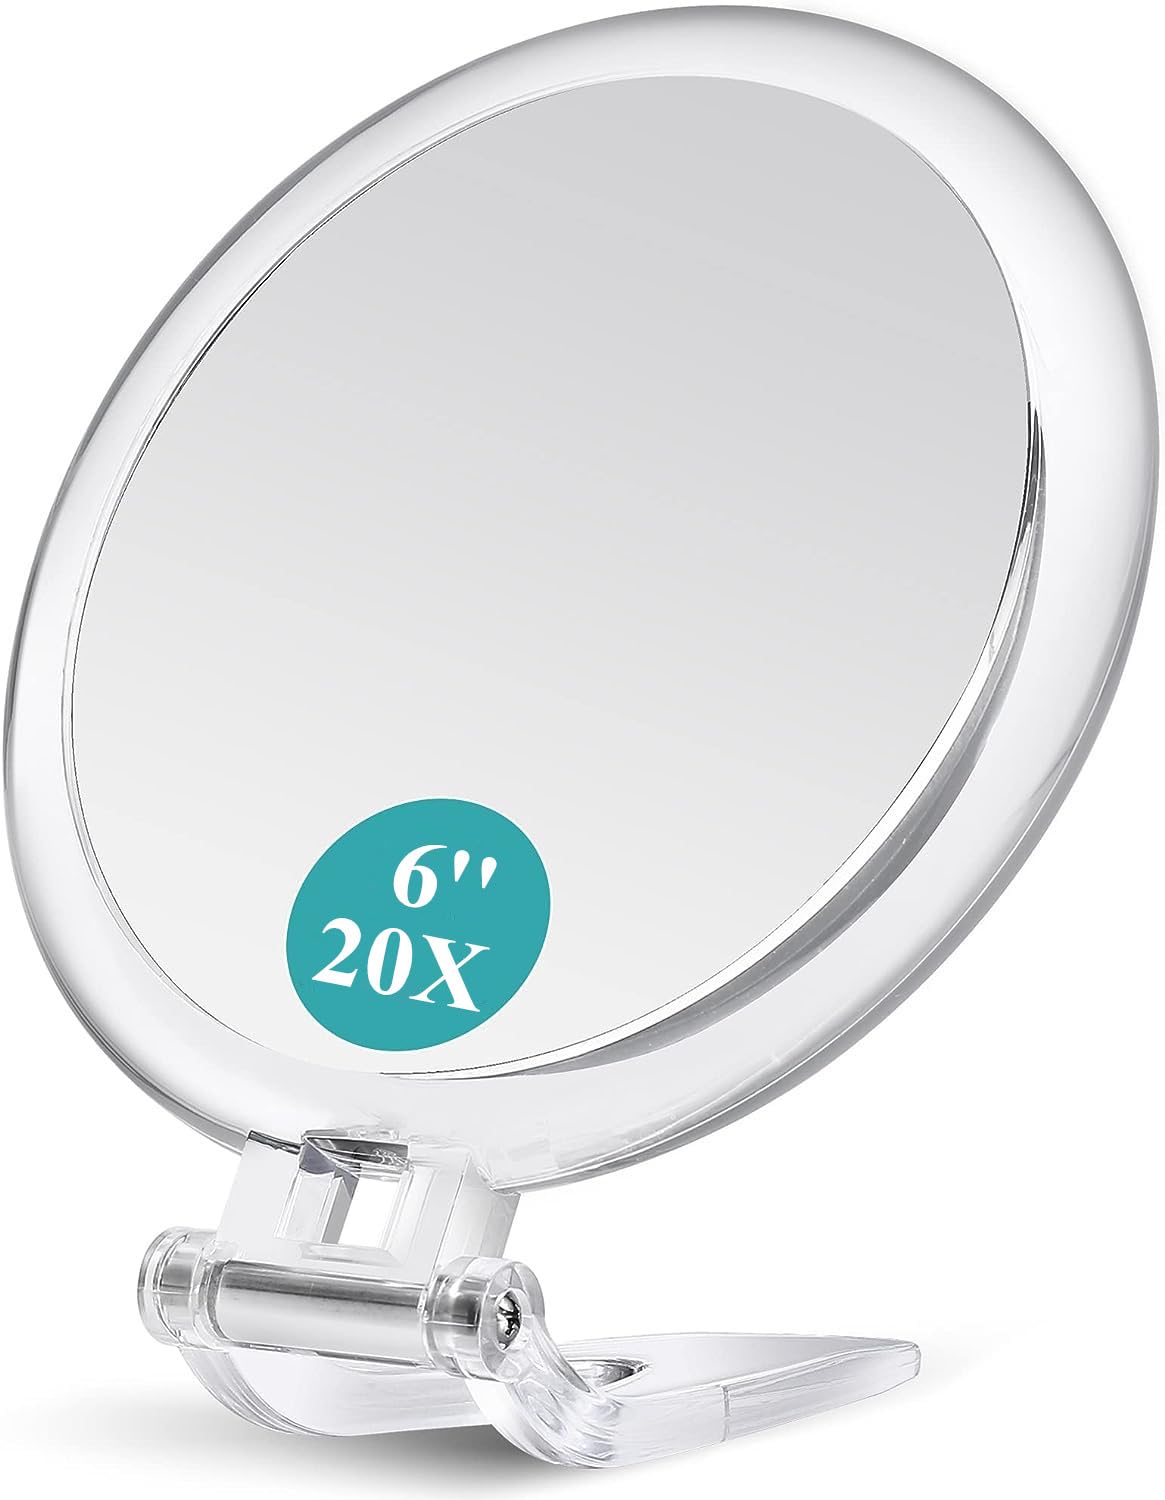 20x Magnifying Hand Mirror, 5.9 inches (15 cm), Large Size, Folding, Double-Sided Mirror, Compact, Tabletop, Handheld, 3-Way Usable, Includes Tweezers, Storage Bag, Cleaning Cloth, Clear